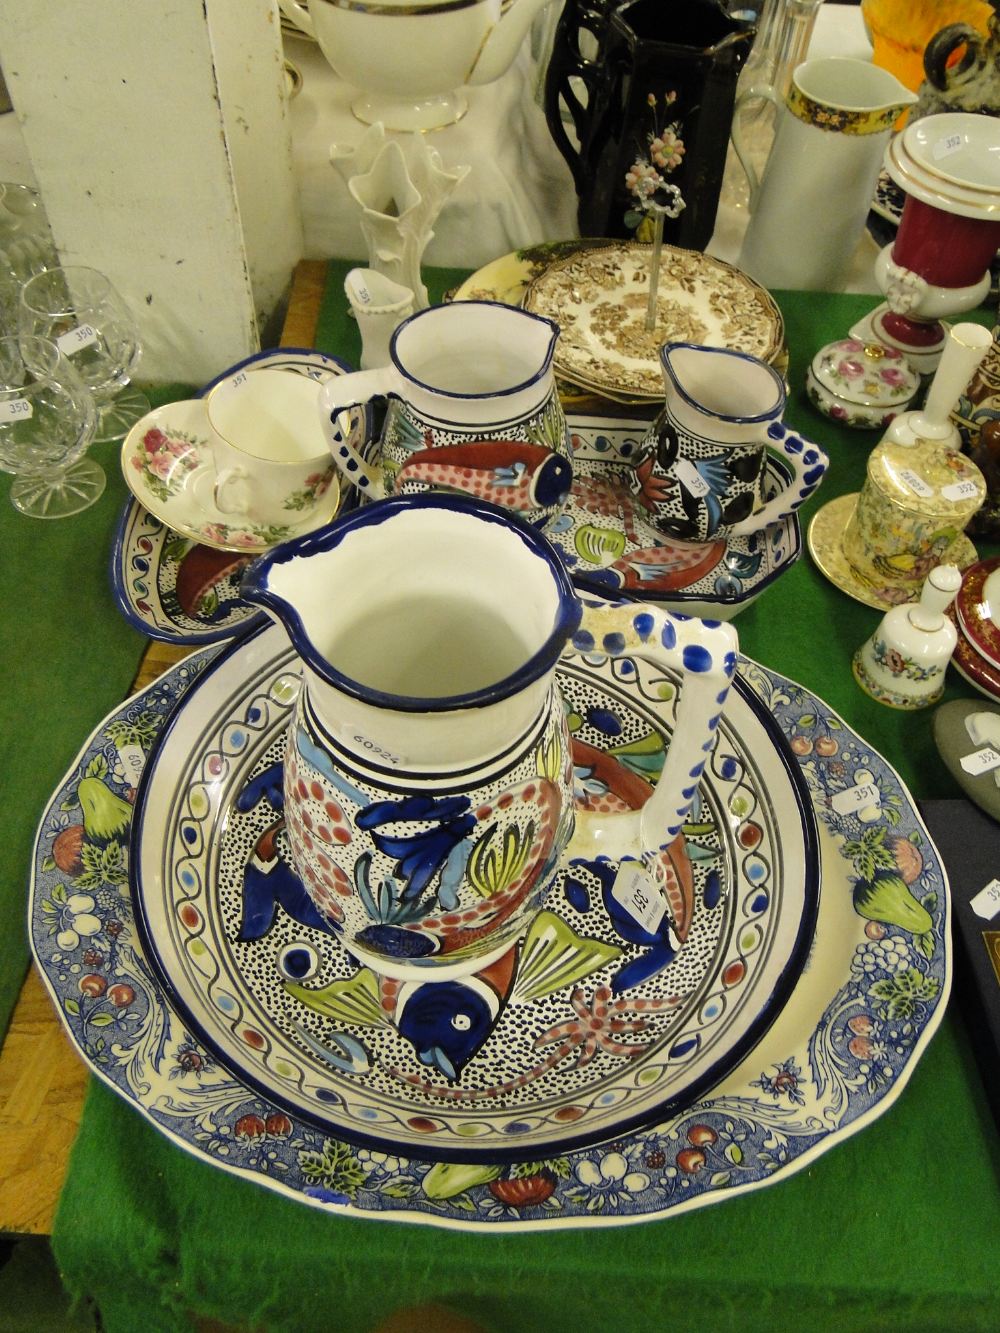 Jugs, plates and ornaments.